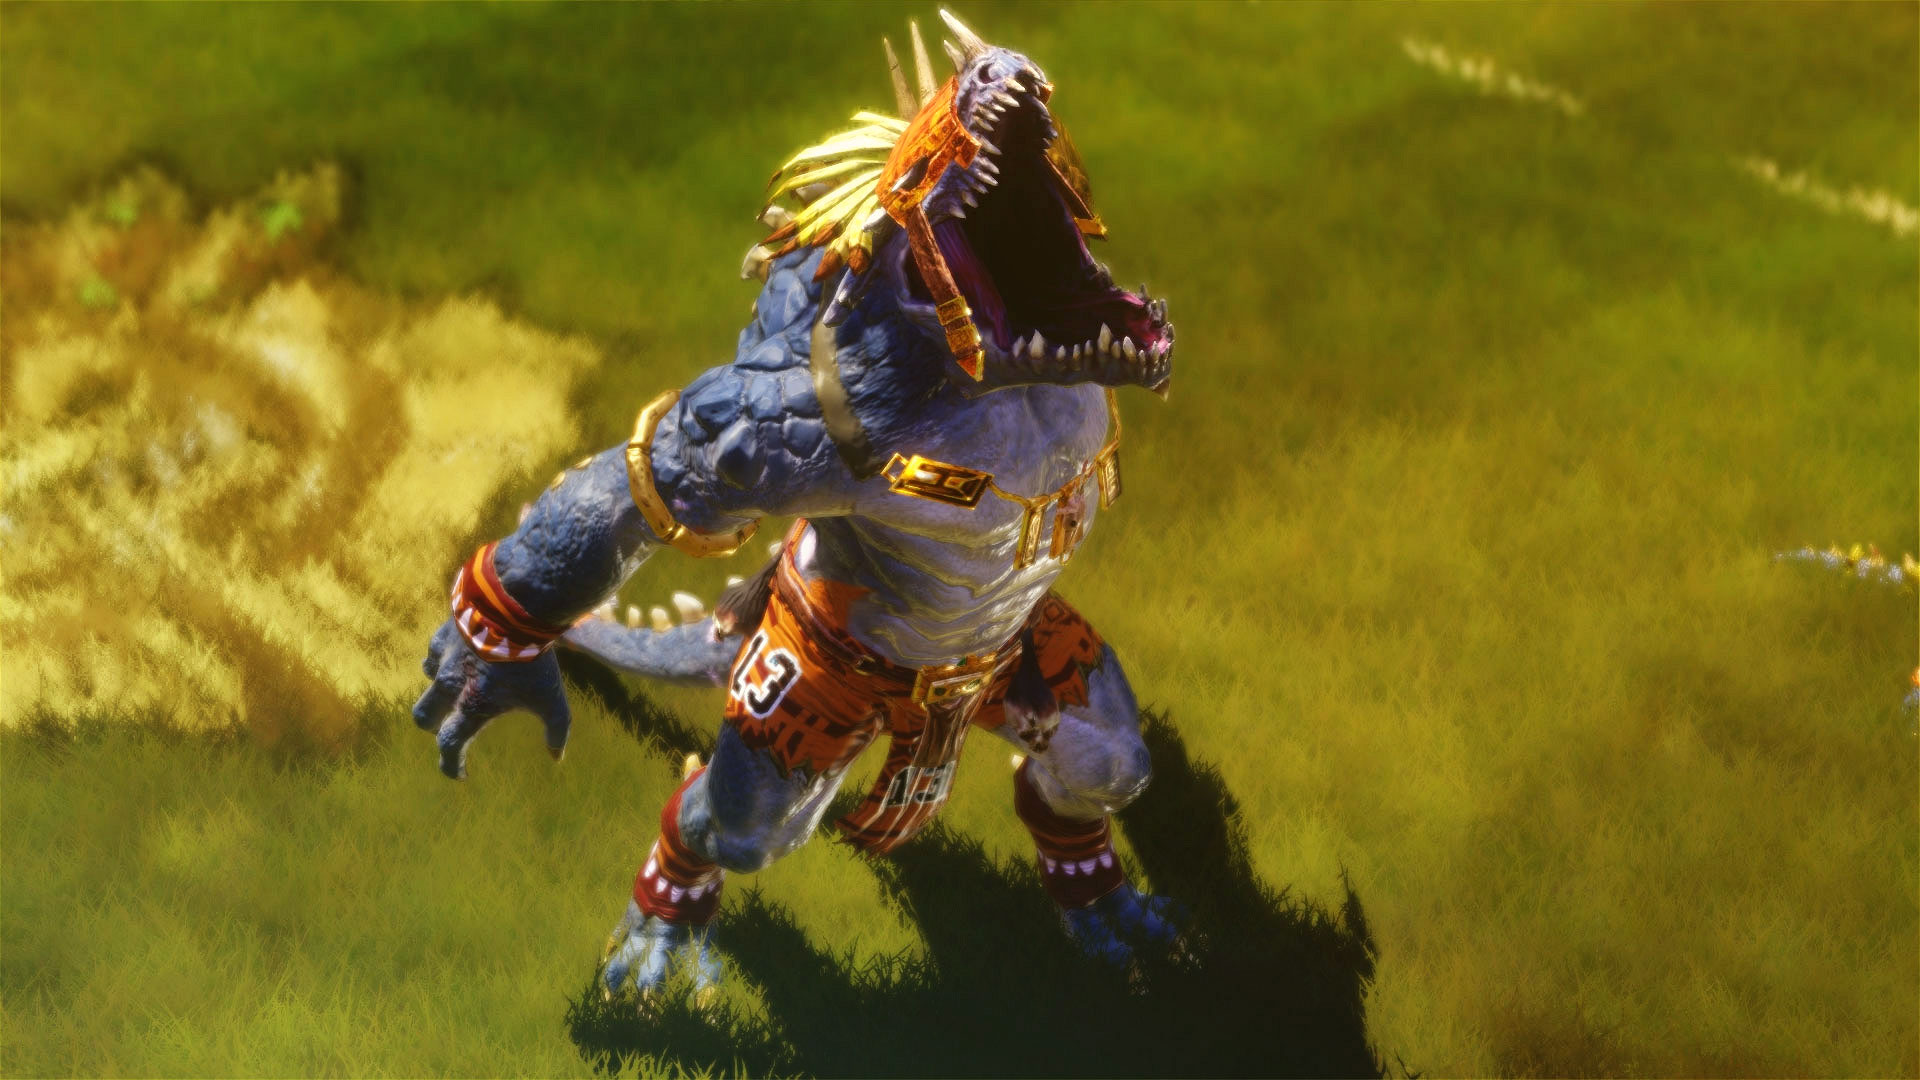 blood bowl 3 review